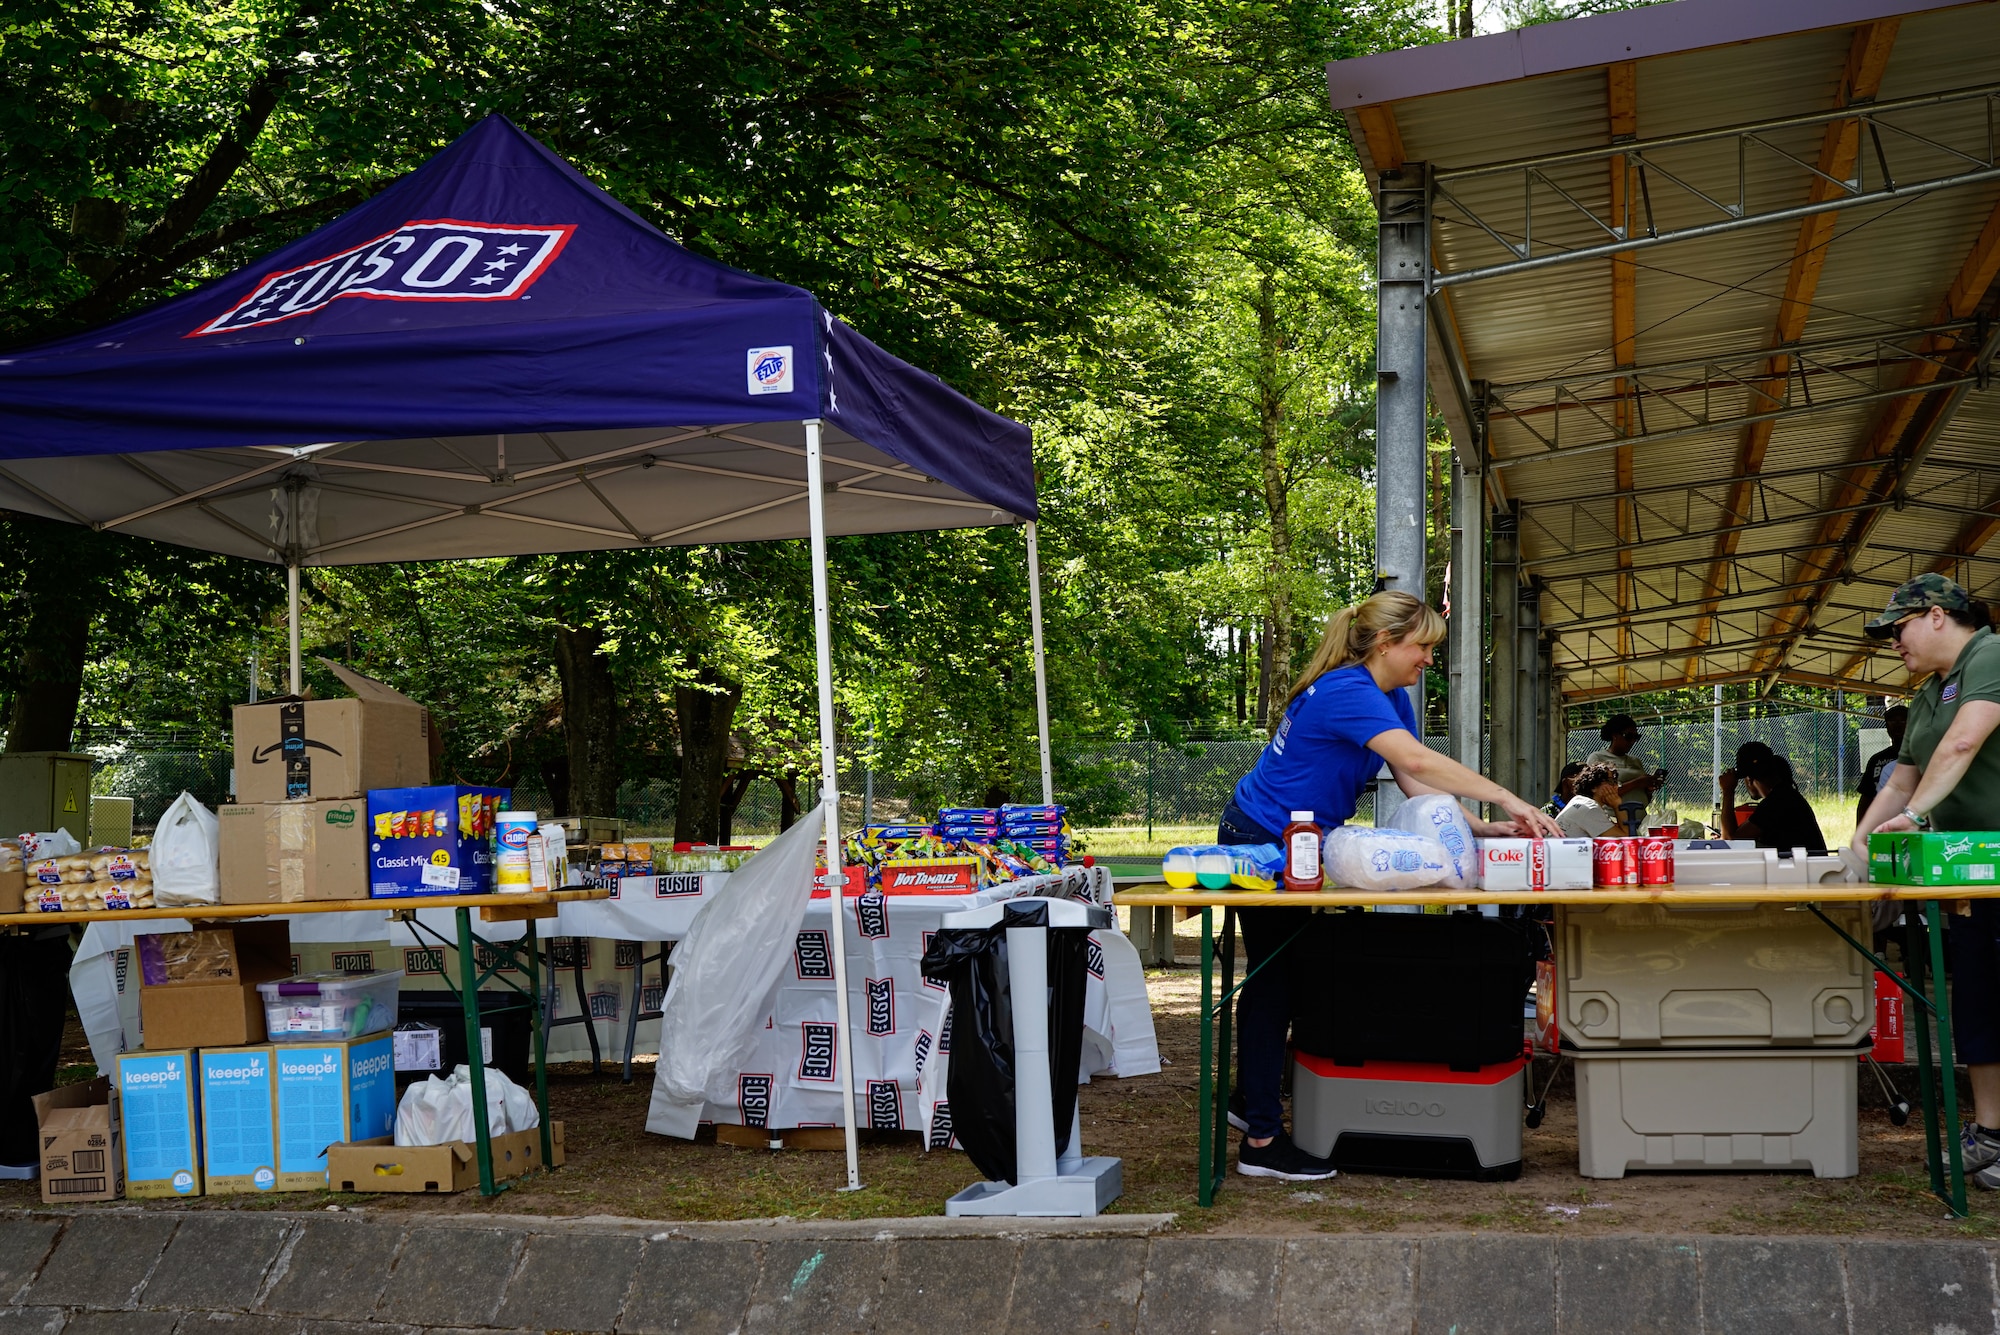 USO volunteers set up a table for the Juneteenth Celebration at Pulaski Barracks, Germany, June 18, 2022. The USO donated drinks, chips, and other side items. The event featured a kid zone, spades tournament, and educational tribute speakers.  (U.S. Air Force photo by Airman 1st Class Lauren Jacoby)